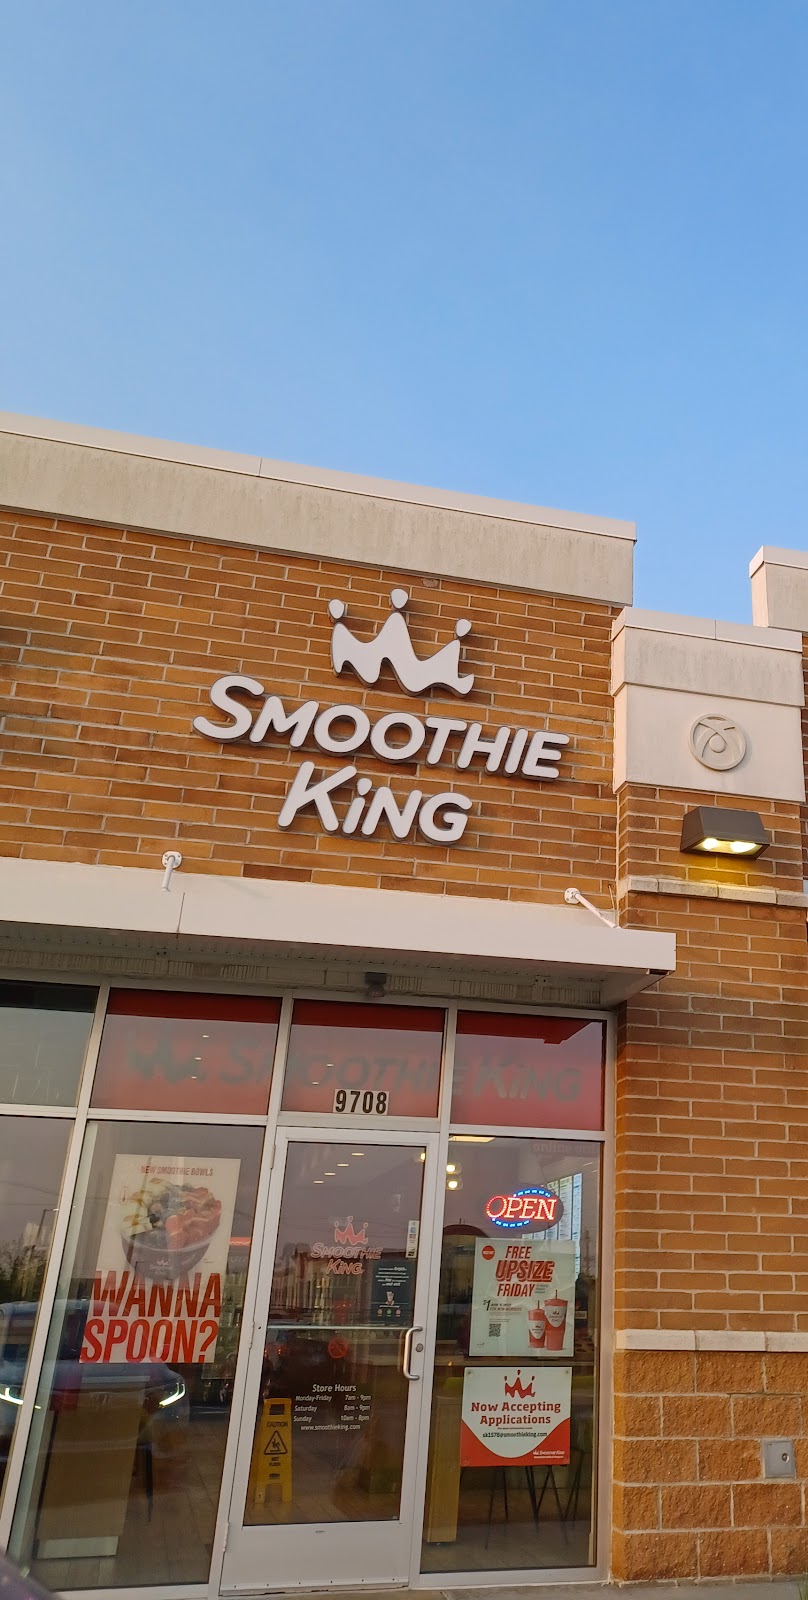 Smoothie King | meal delivery | 9708 Cleveland - East Liverpool Rd, OH-14, Streetsboro, OH 44241, USA | 3308516890 OR +1 330-851-6890